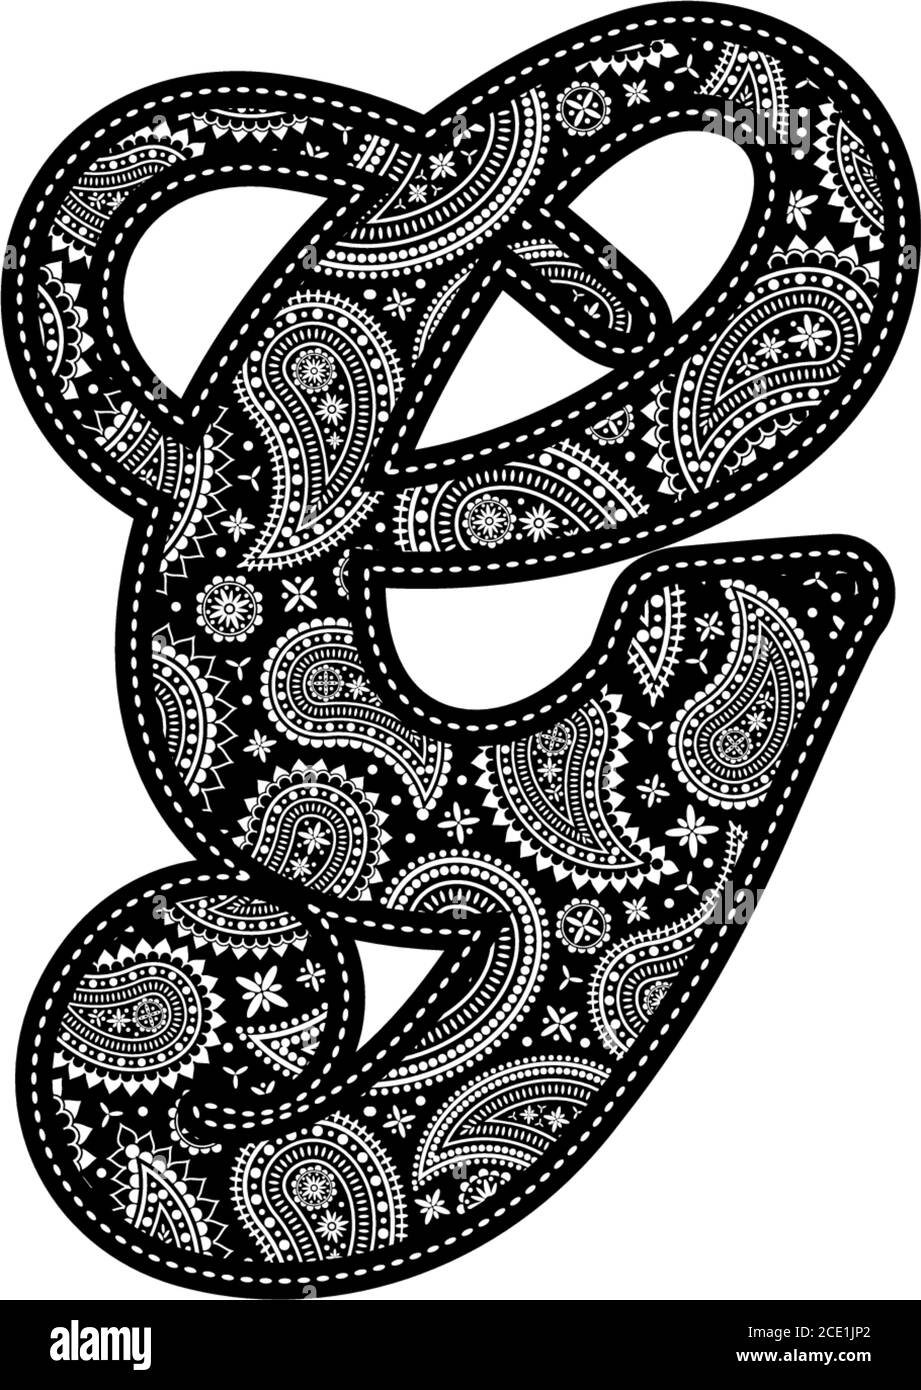 Capital Letter G With Paisley Pattern Design Embroidery Style In Black Color Isolated On White Stock Vector Image Art Alamy